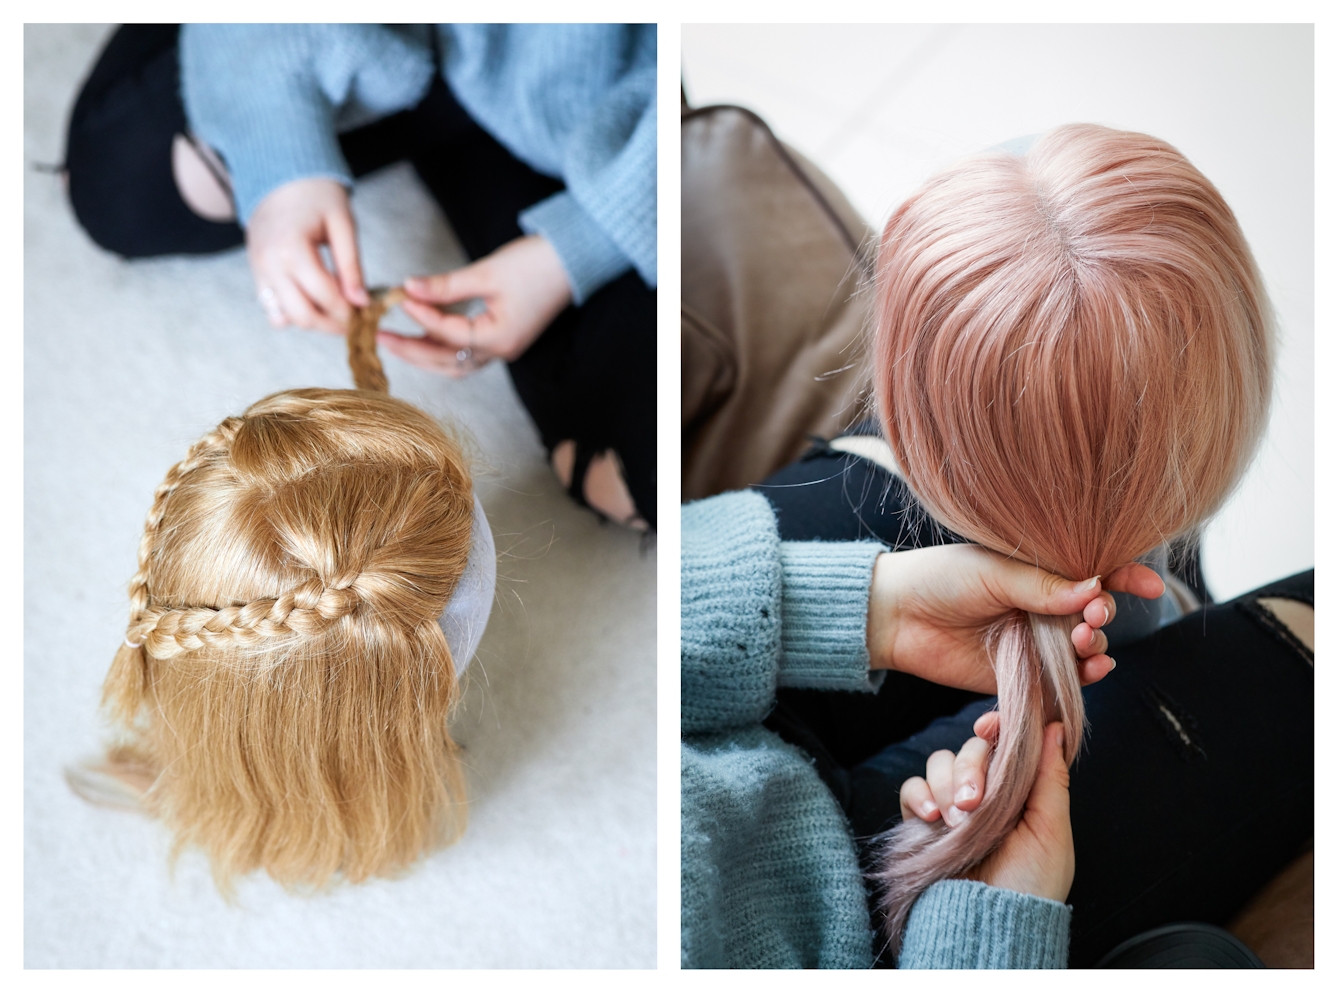 Photographic diptych. Both images are similar in that they both show a view from above looking down on a wig resting on a mannequin head. In both images there is the lap and hands of a young girl who is in the process of caring for the wigs. The main difference is that the image on the left shows a blonde wig with plaits and the image on the right show a light pink straight haired wig.